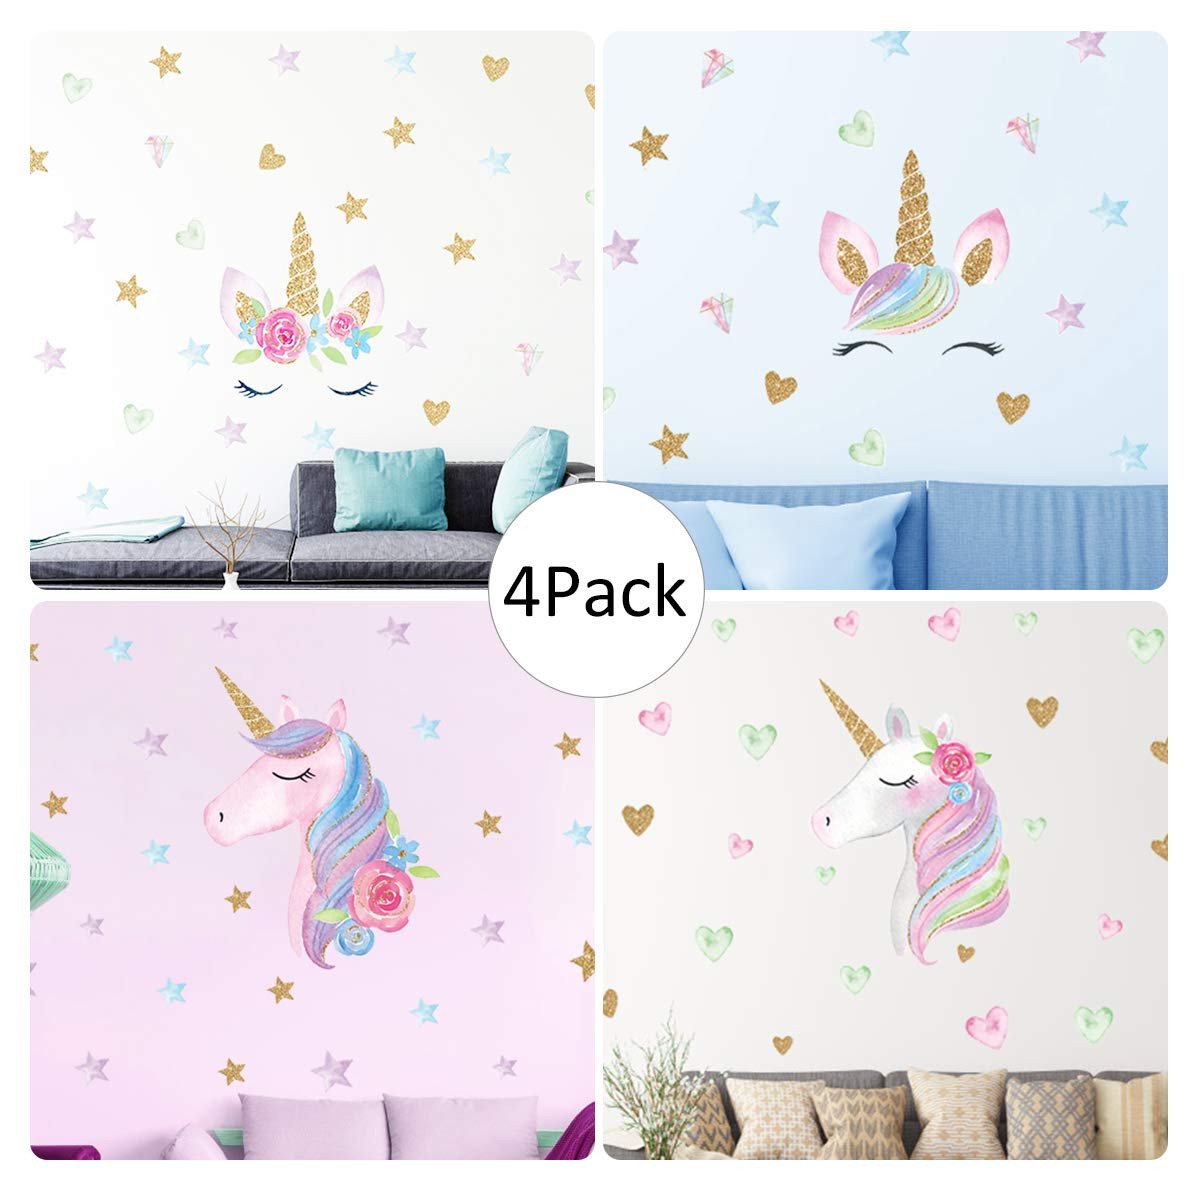 Wall Decoration for Girls Bedroom Unique Unicorn Wall Decal 4 Pack 4 Styles Unicorn Wall Stickers Decor with Heart &amp; Stars for Girls Bedroom Home Decorations